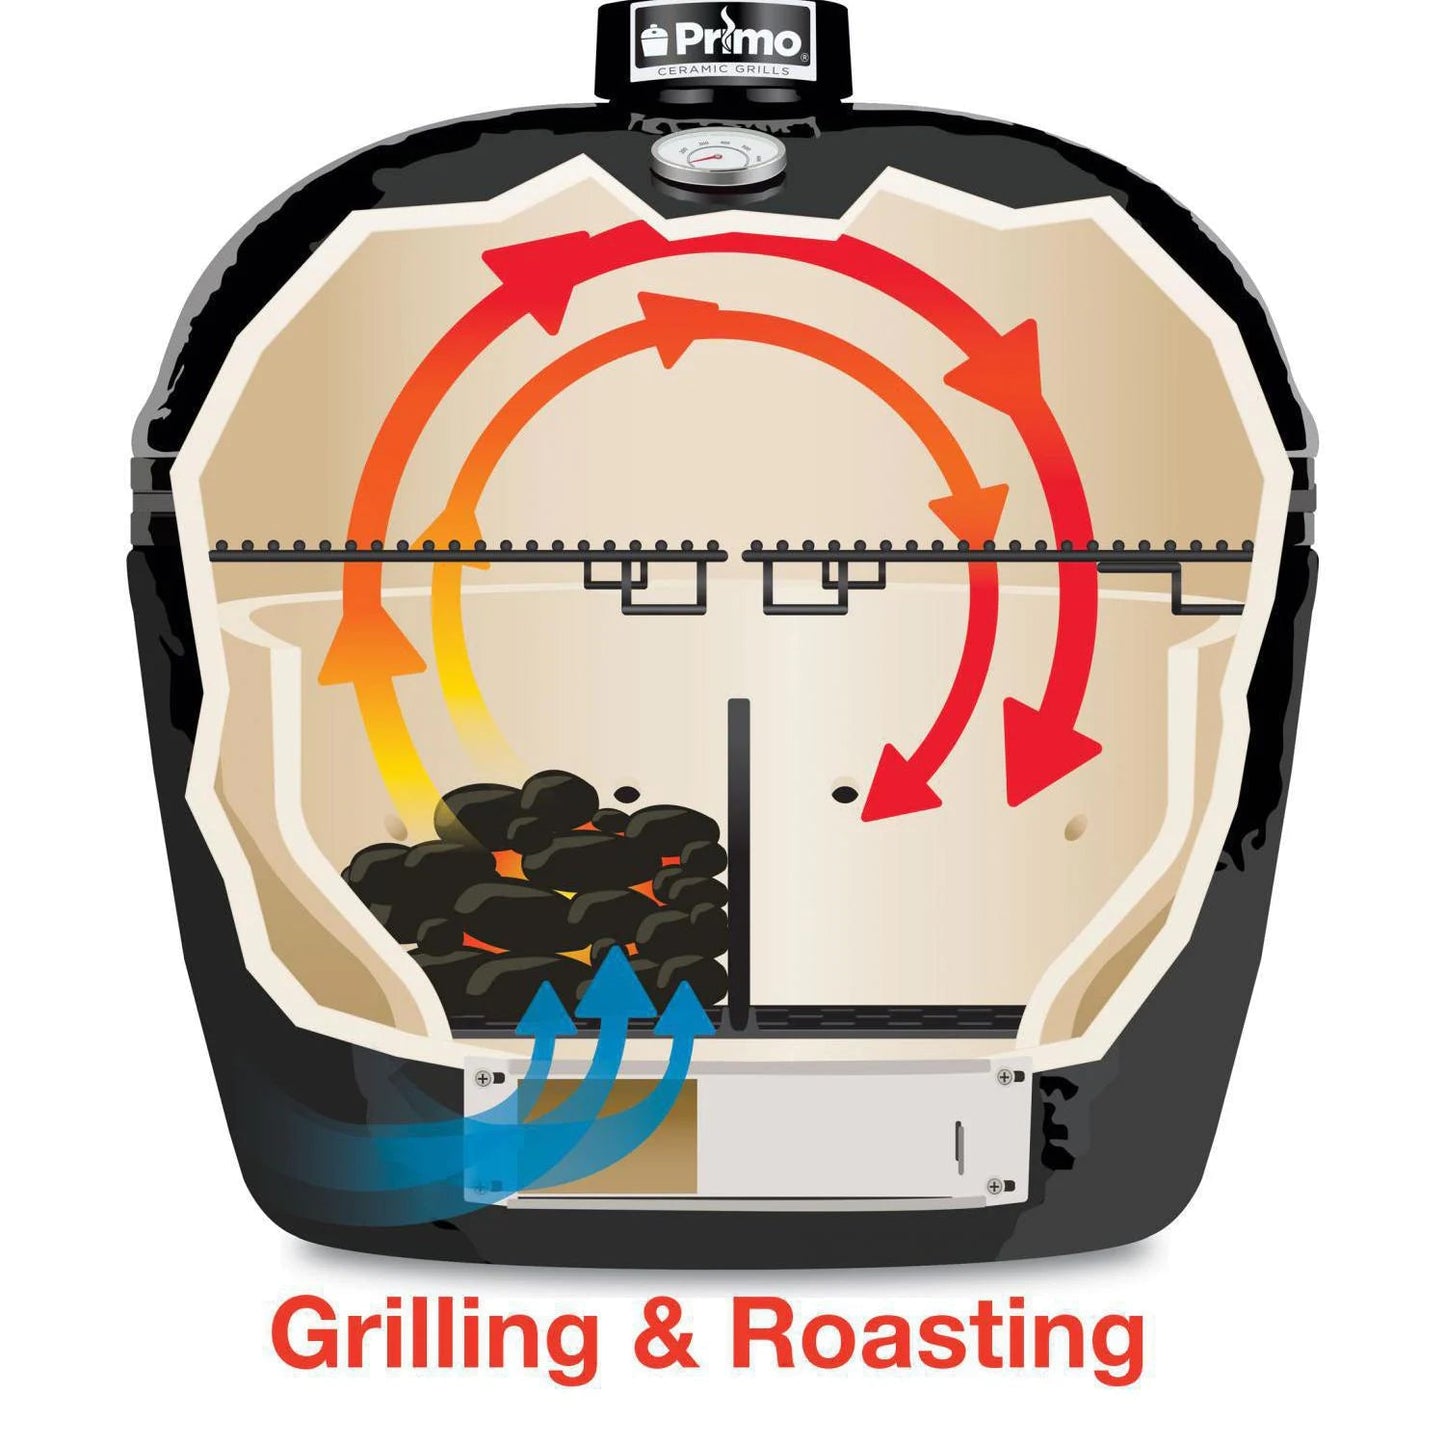 Primo Junior 200 Oval Ceramic Kamado Grill with Stainless Steel Grates -PGCJRH - Grills N More